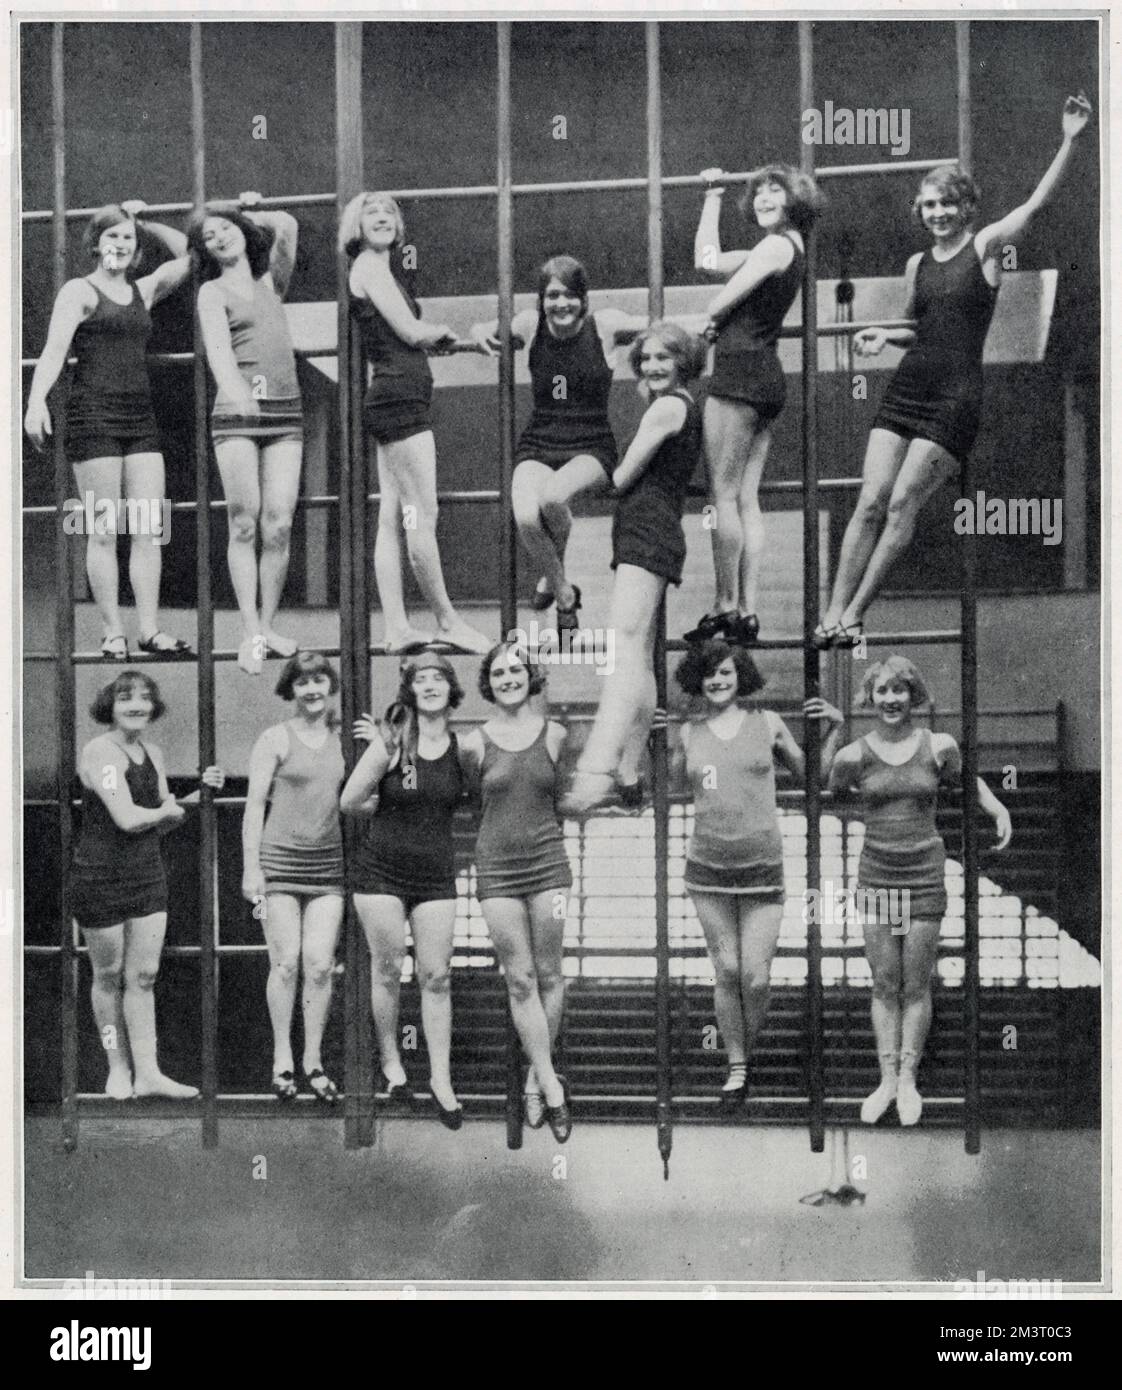 The Hoffman Girls, the dance troupe founded, managed and choreographed by Gertrude Hoffman, pictured in rehearsals for Leap Year which had had a successful run at the London Hippodrome and was moving on to the Palace Theatre in Manchester. As the original Leap Year dancers had been contracted to give a show at the Folies Bergere in Paris, Hoffman recruited a new set for the Manchester revue. They are pictured here in the gymnasium practising for part of their act which required them to climb and hang from webbing.     Date: 1925 Stock Photo